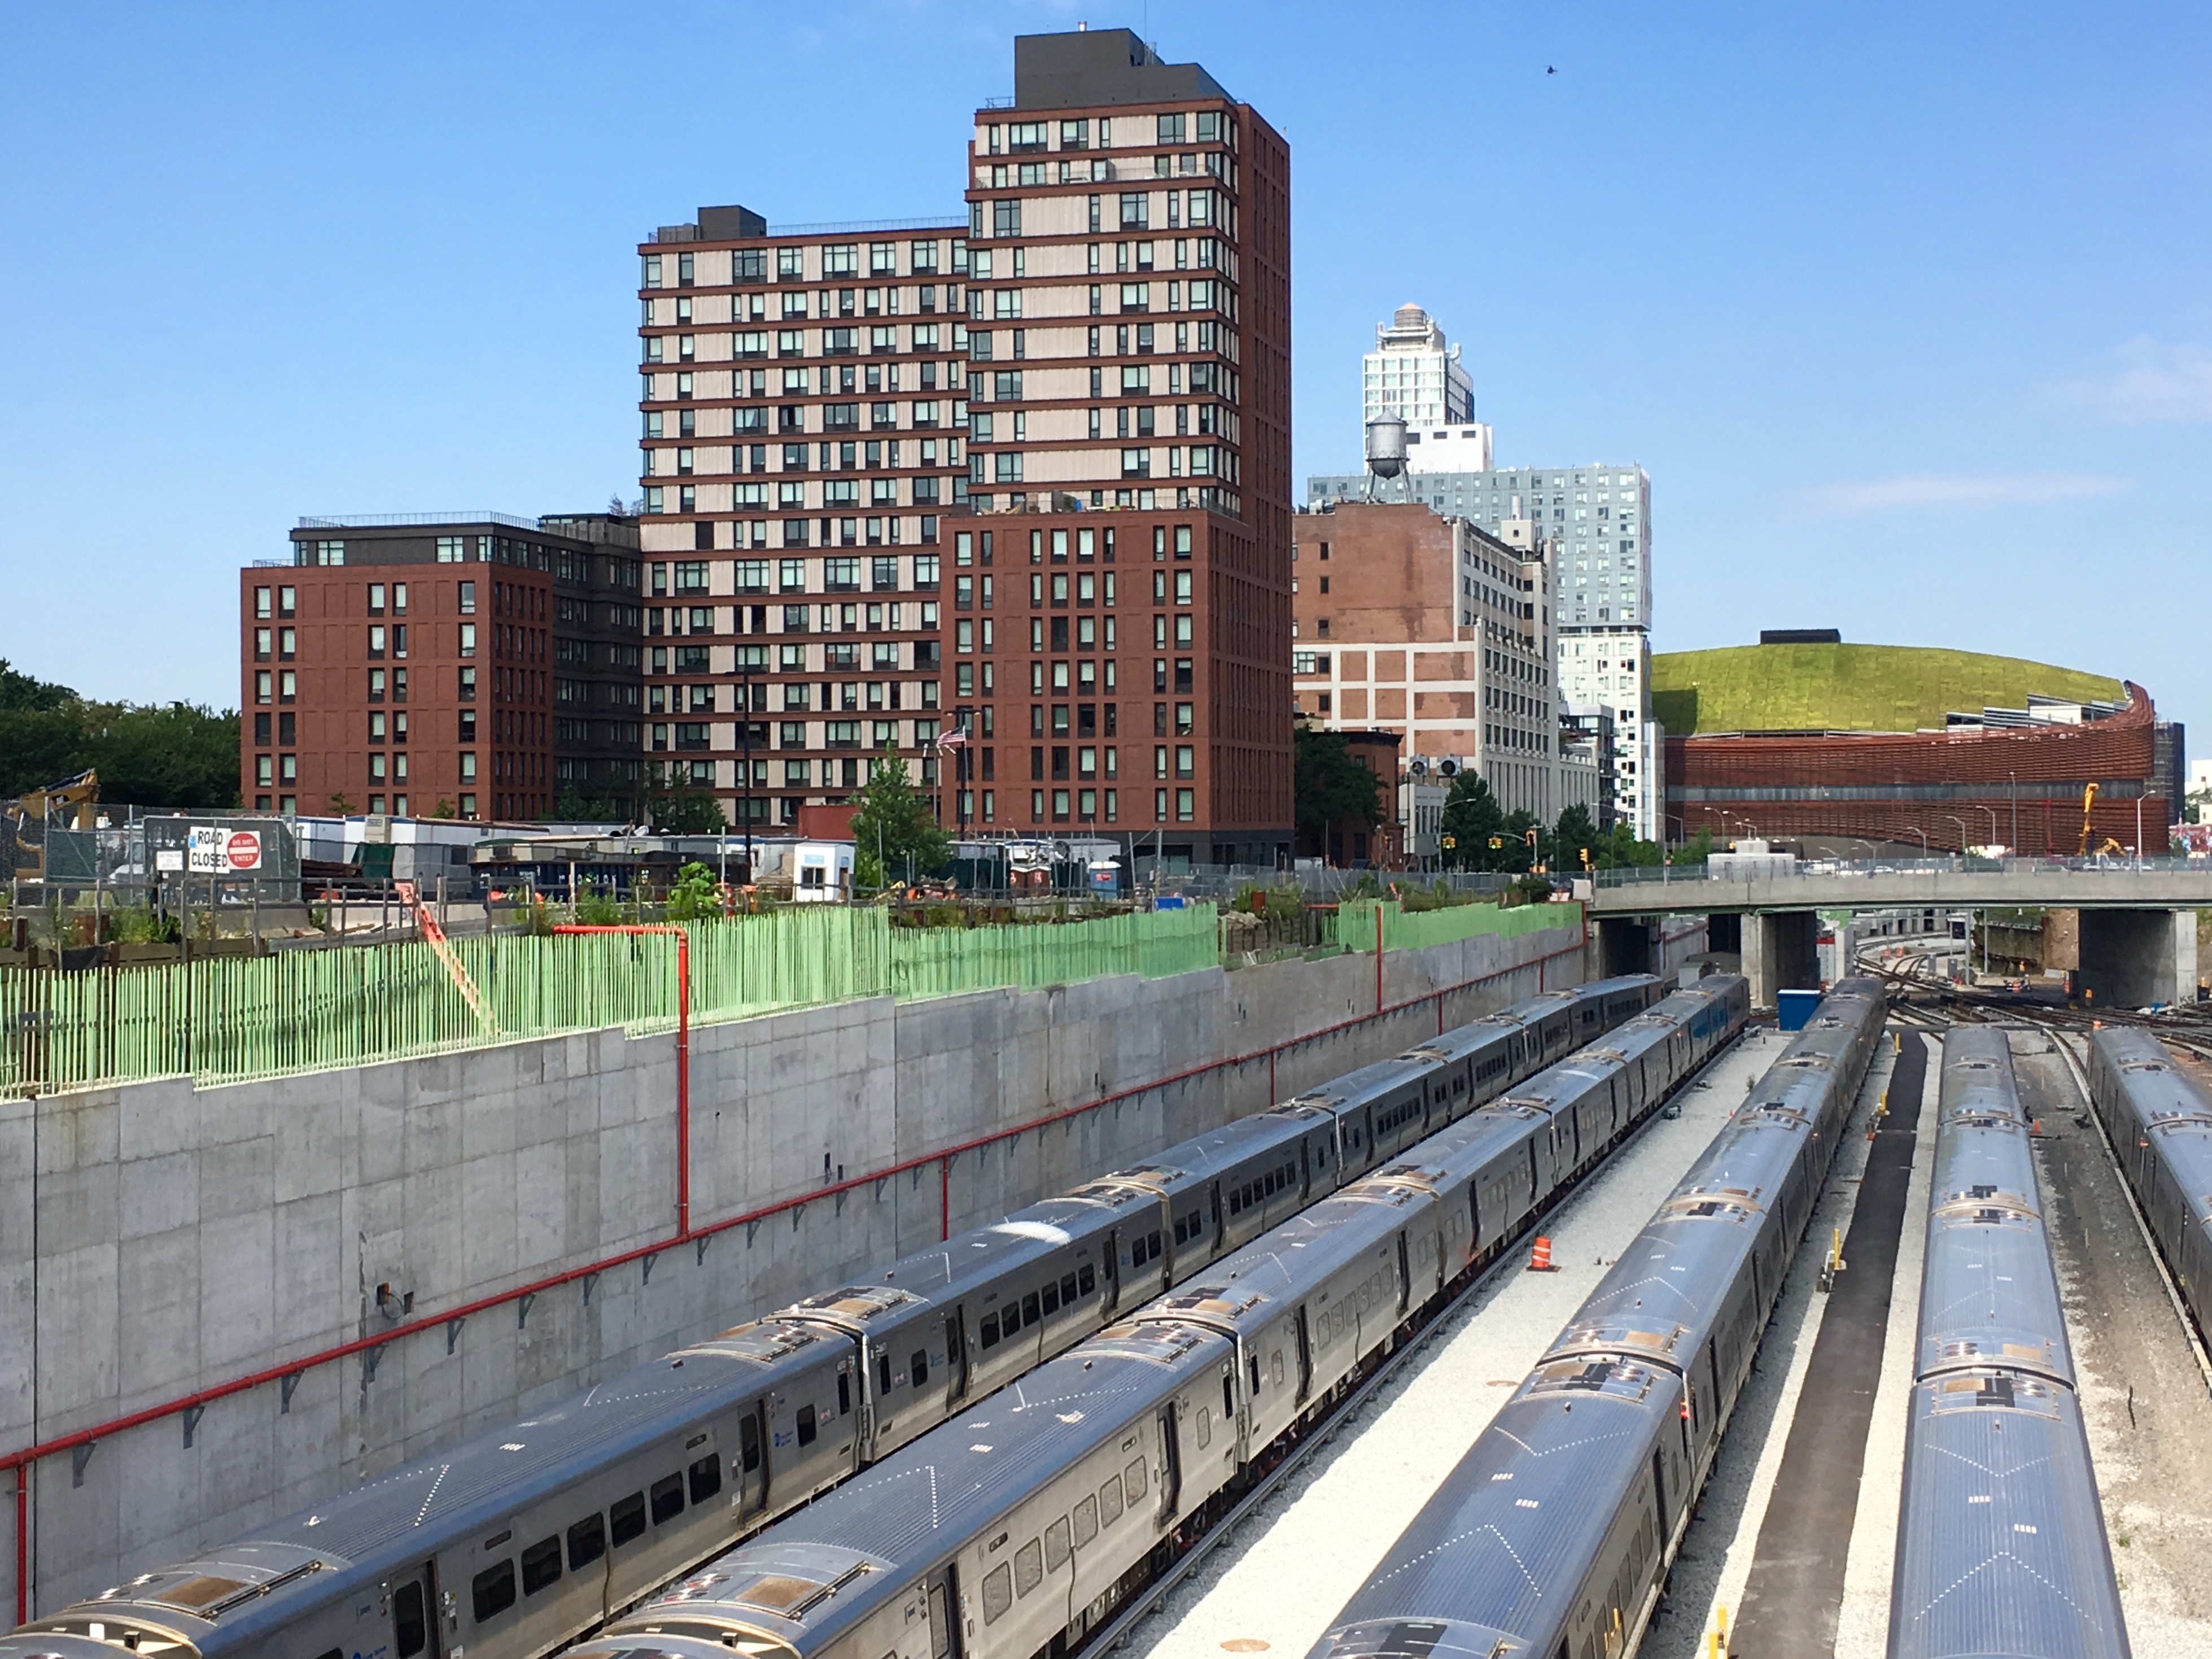 Greenland Forest City Partners plans to start constructing a platform over the Long Island Rail Road train yards in 2020. Eagle file photo by Lore Croghan